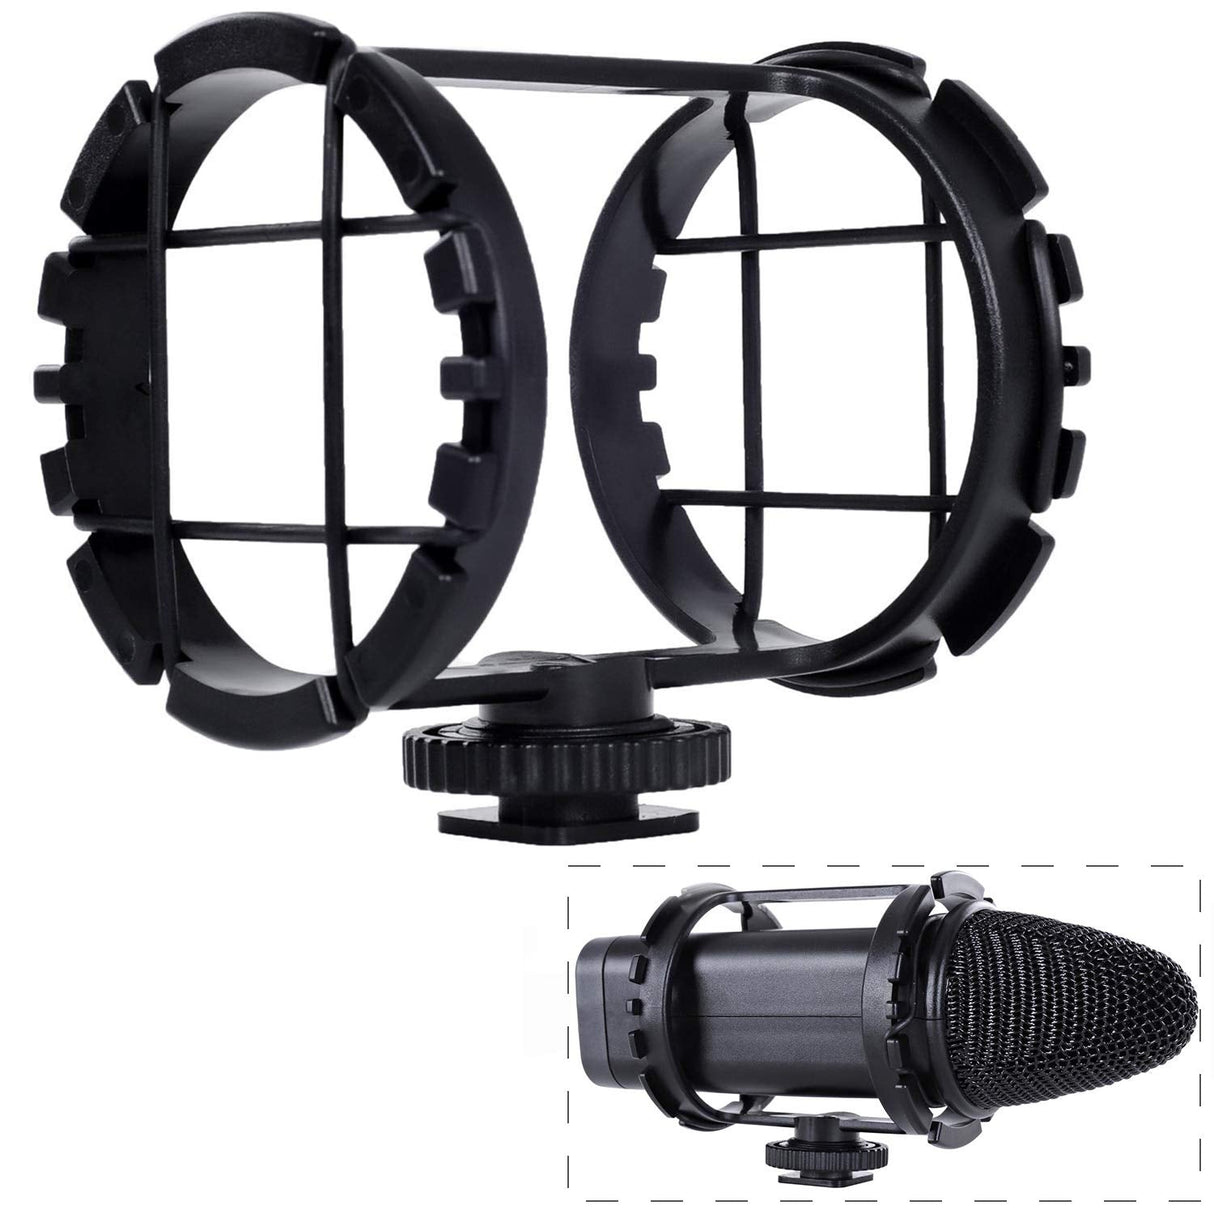 BOYA BY-C03 Camera Shoe Shockmount for Shotgun Microphones 1" to 2" in Diameter (Fits the Zoom H1)